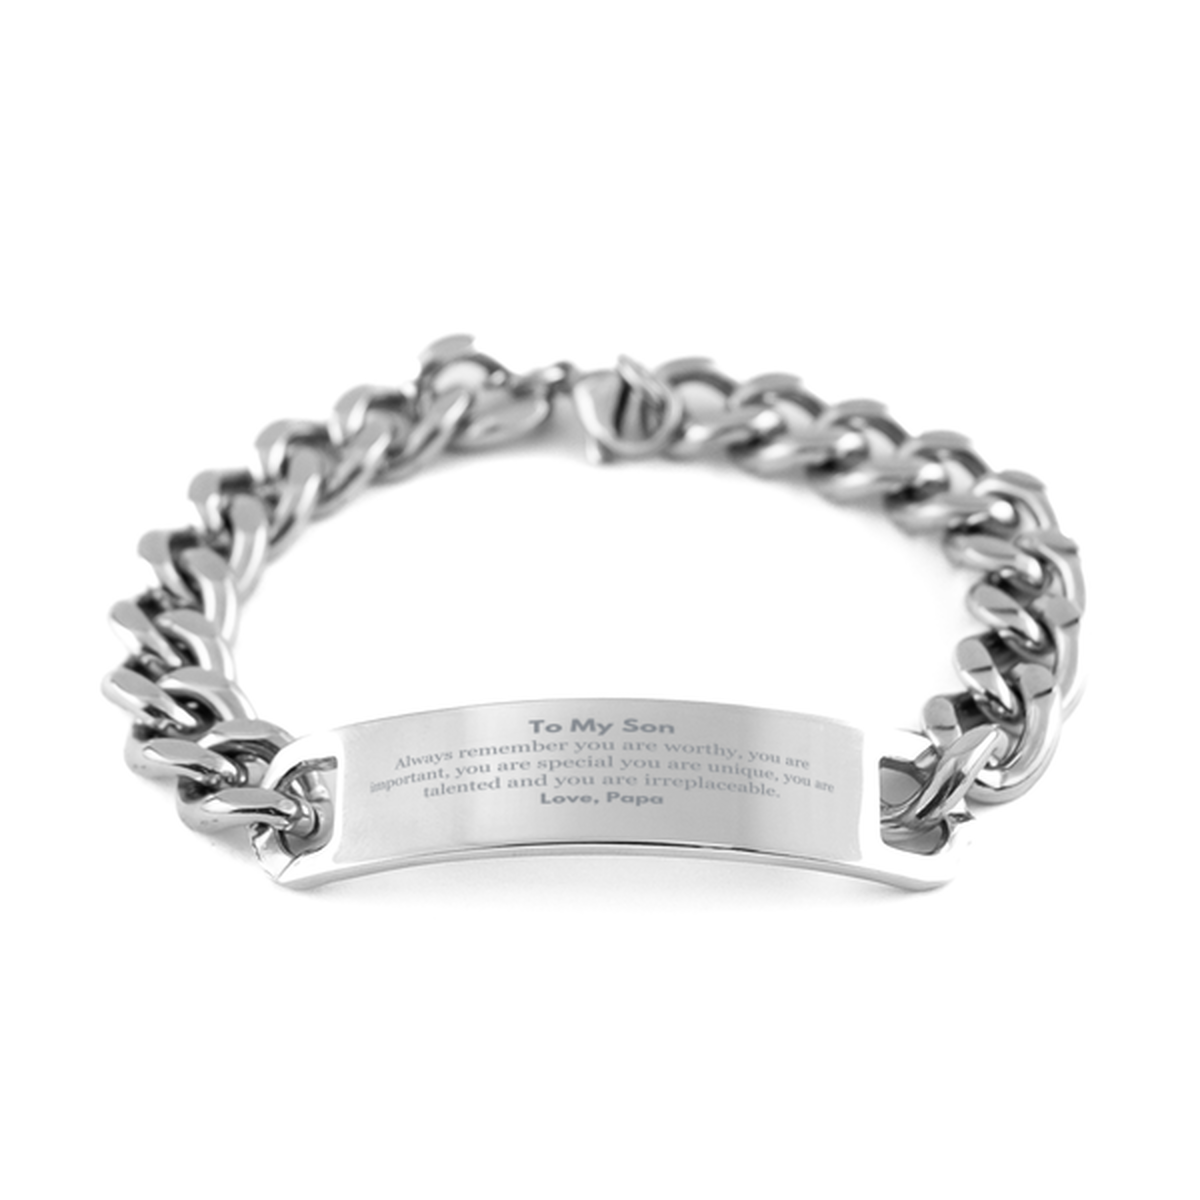 Son Birthday Gifts from Papa, Inspirational Cuban Chain Stainless Steel Bracelet for Son Christmas Graduation Gifts for Son Always remember you are worthy, you are important. Love, Papa